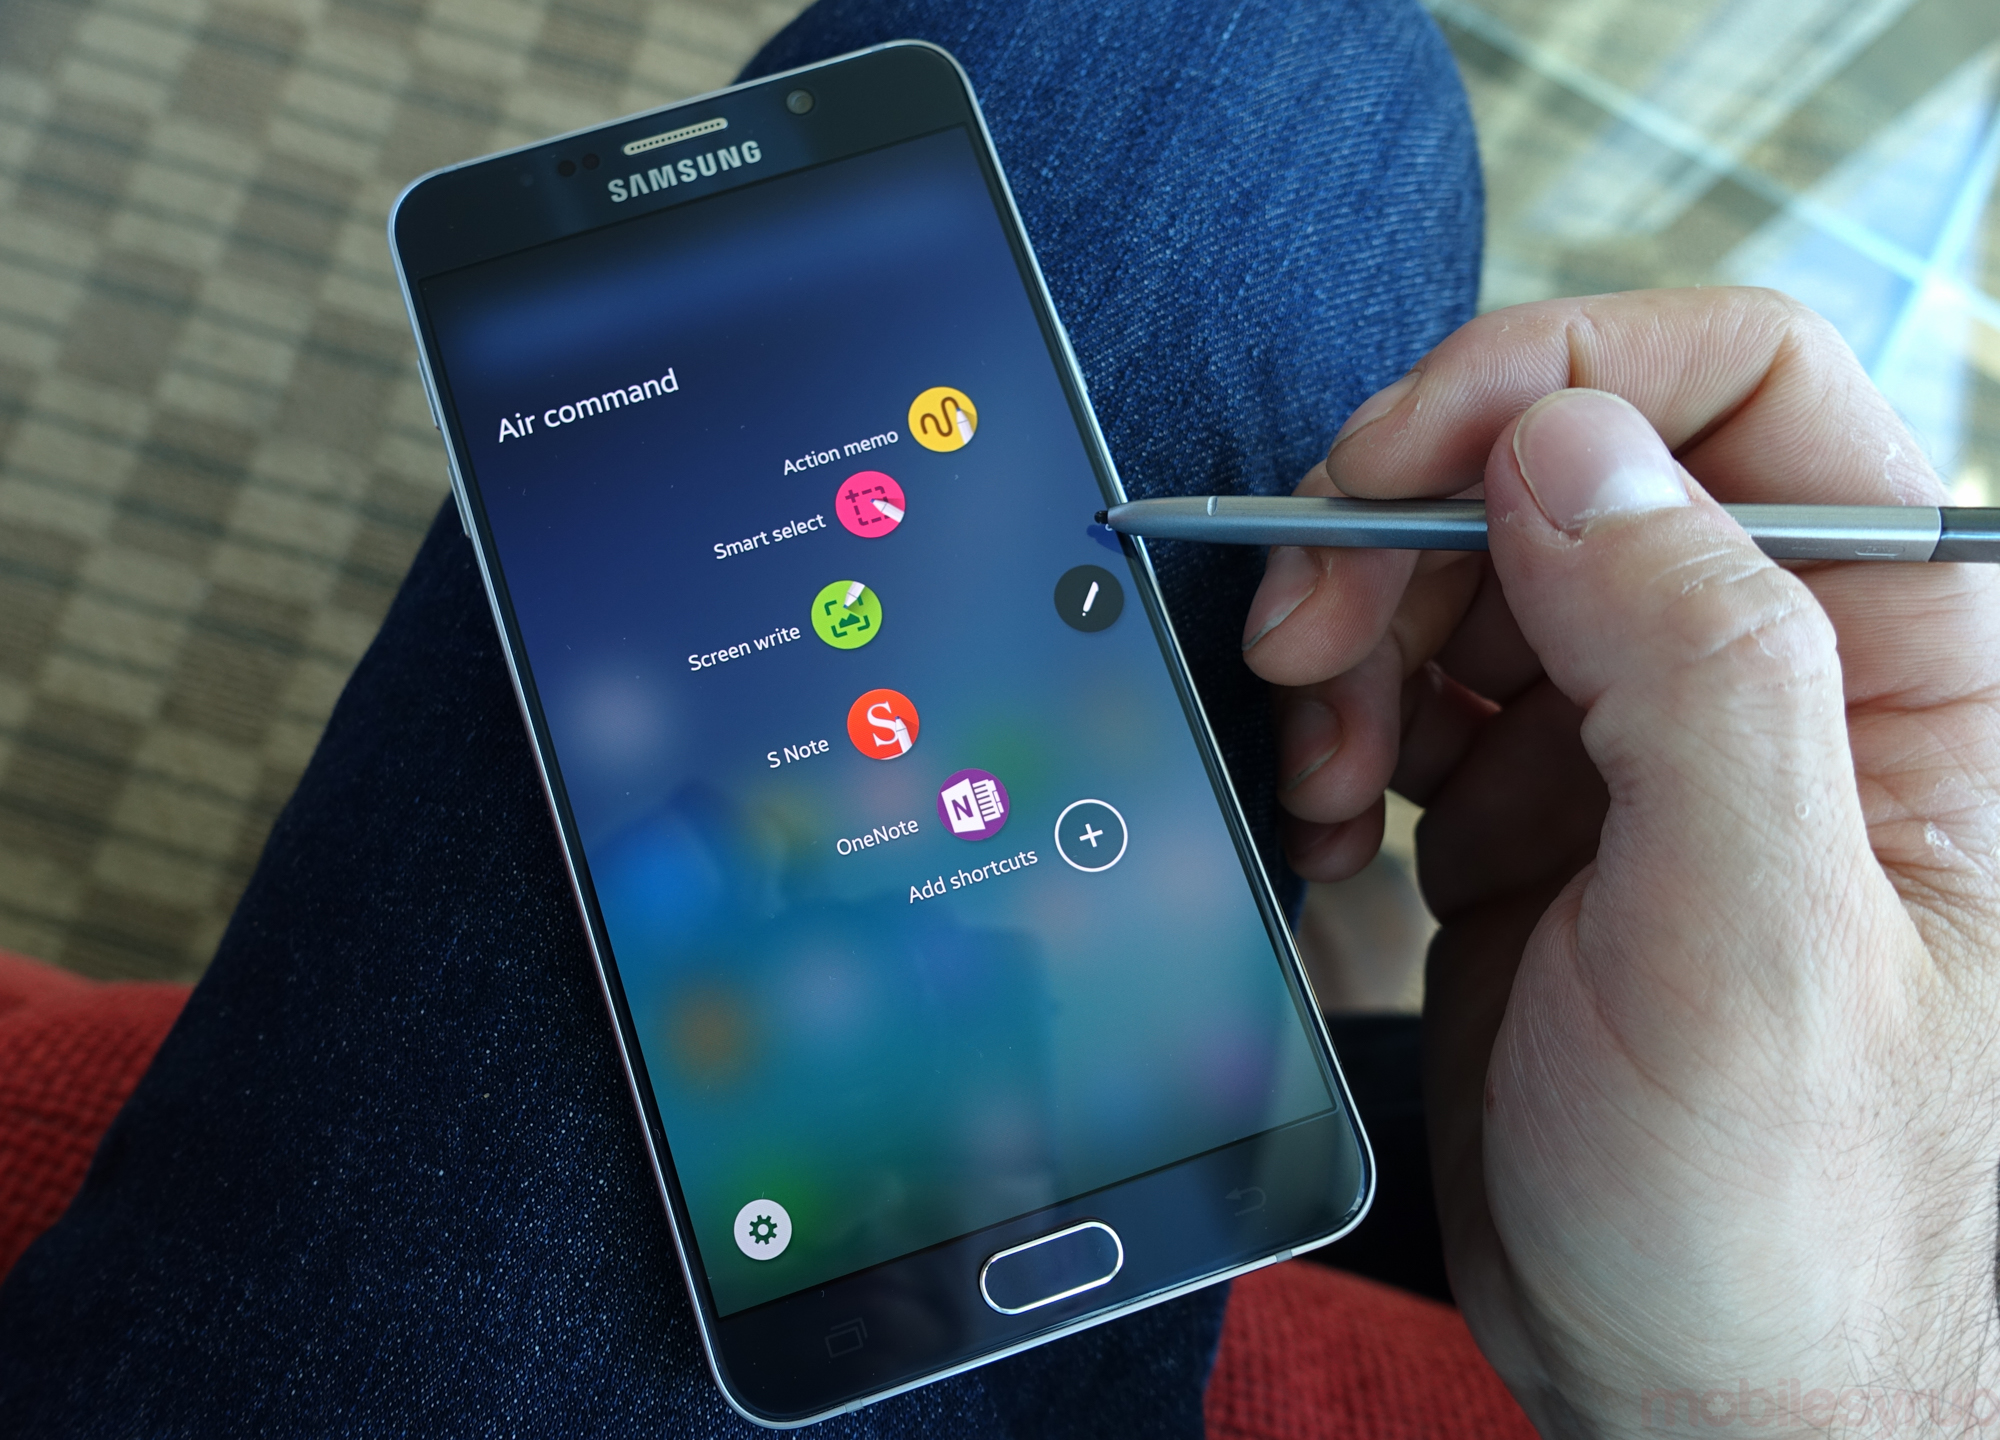 samsunggalaxynote5review-01033